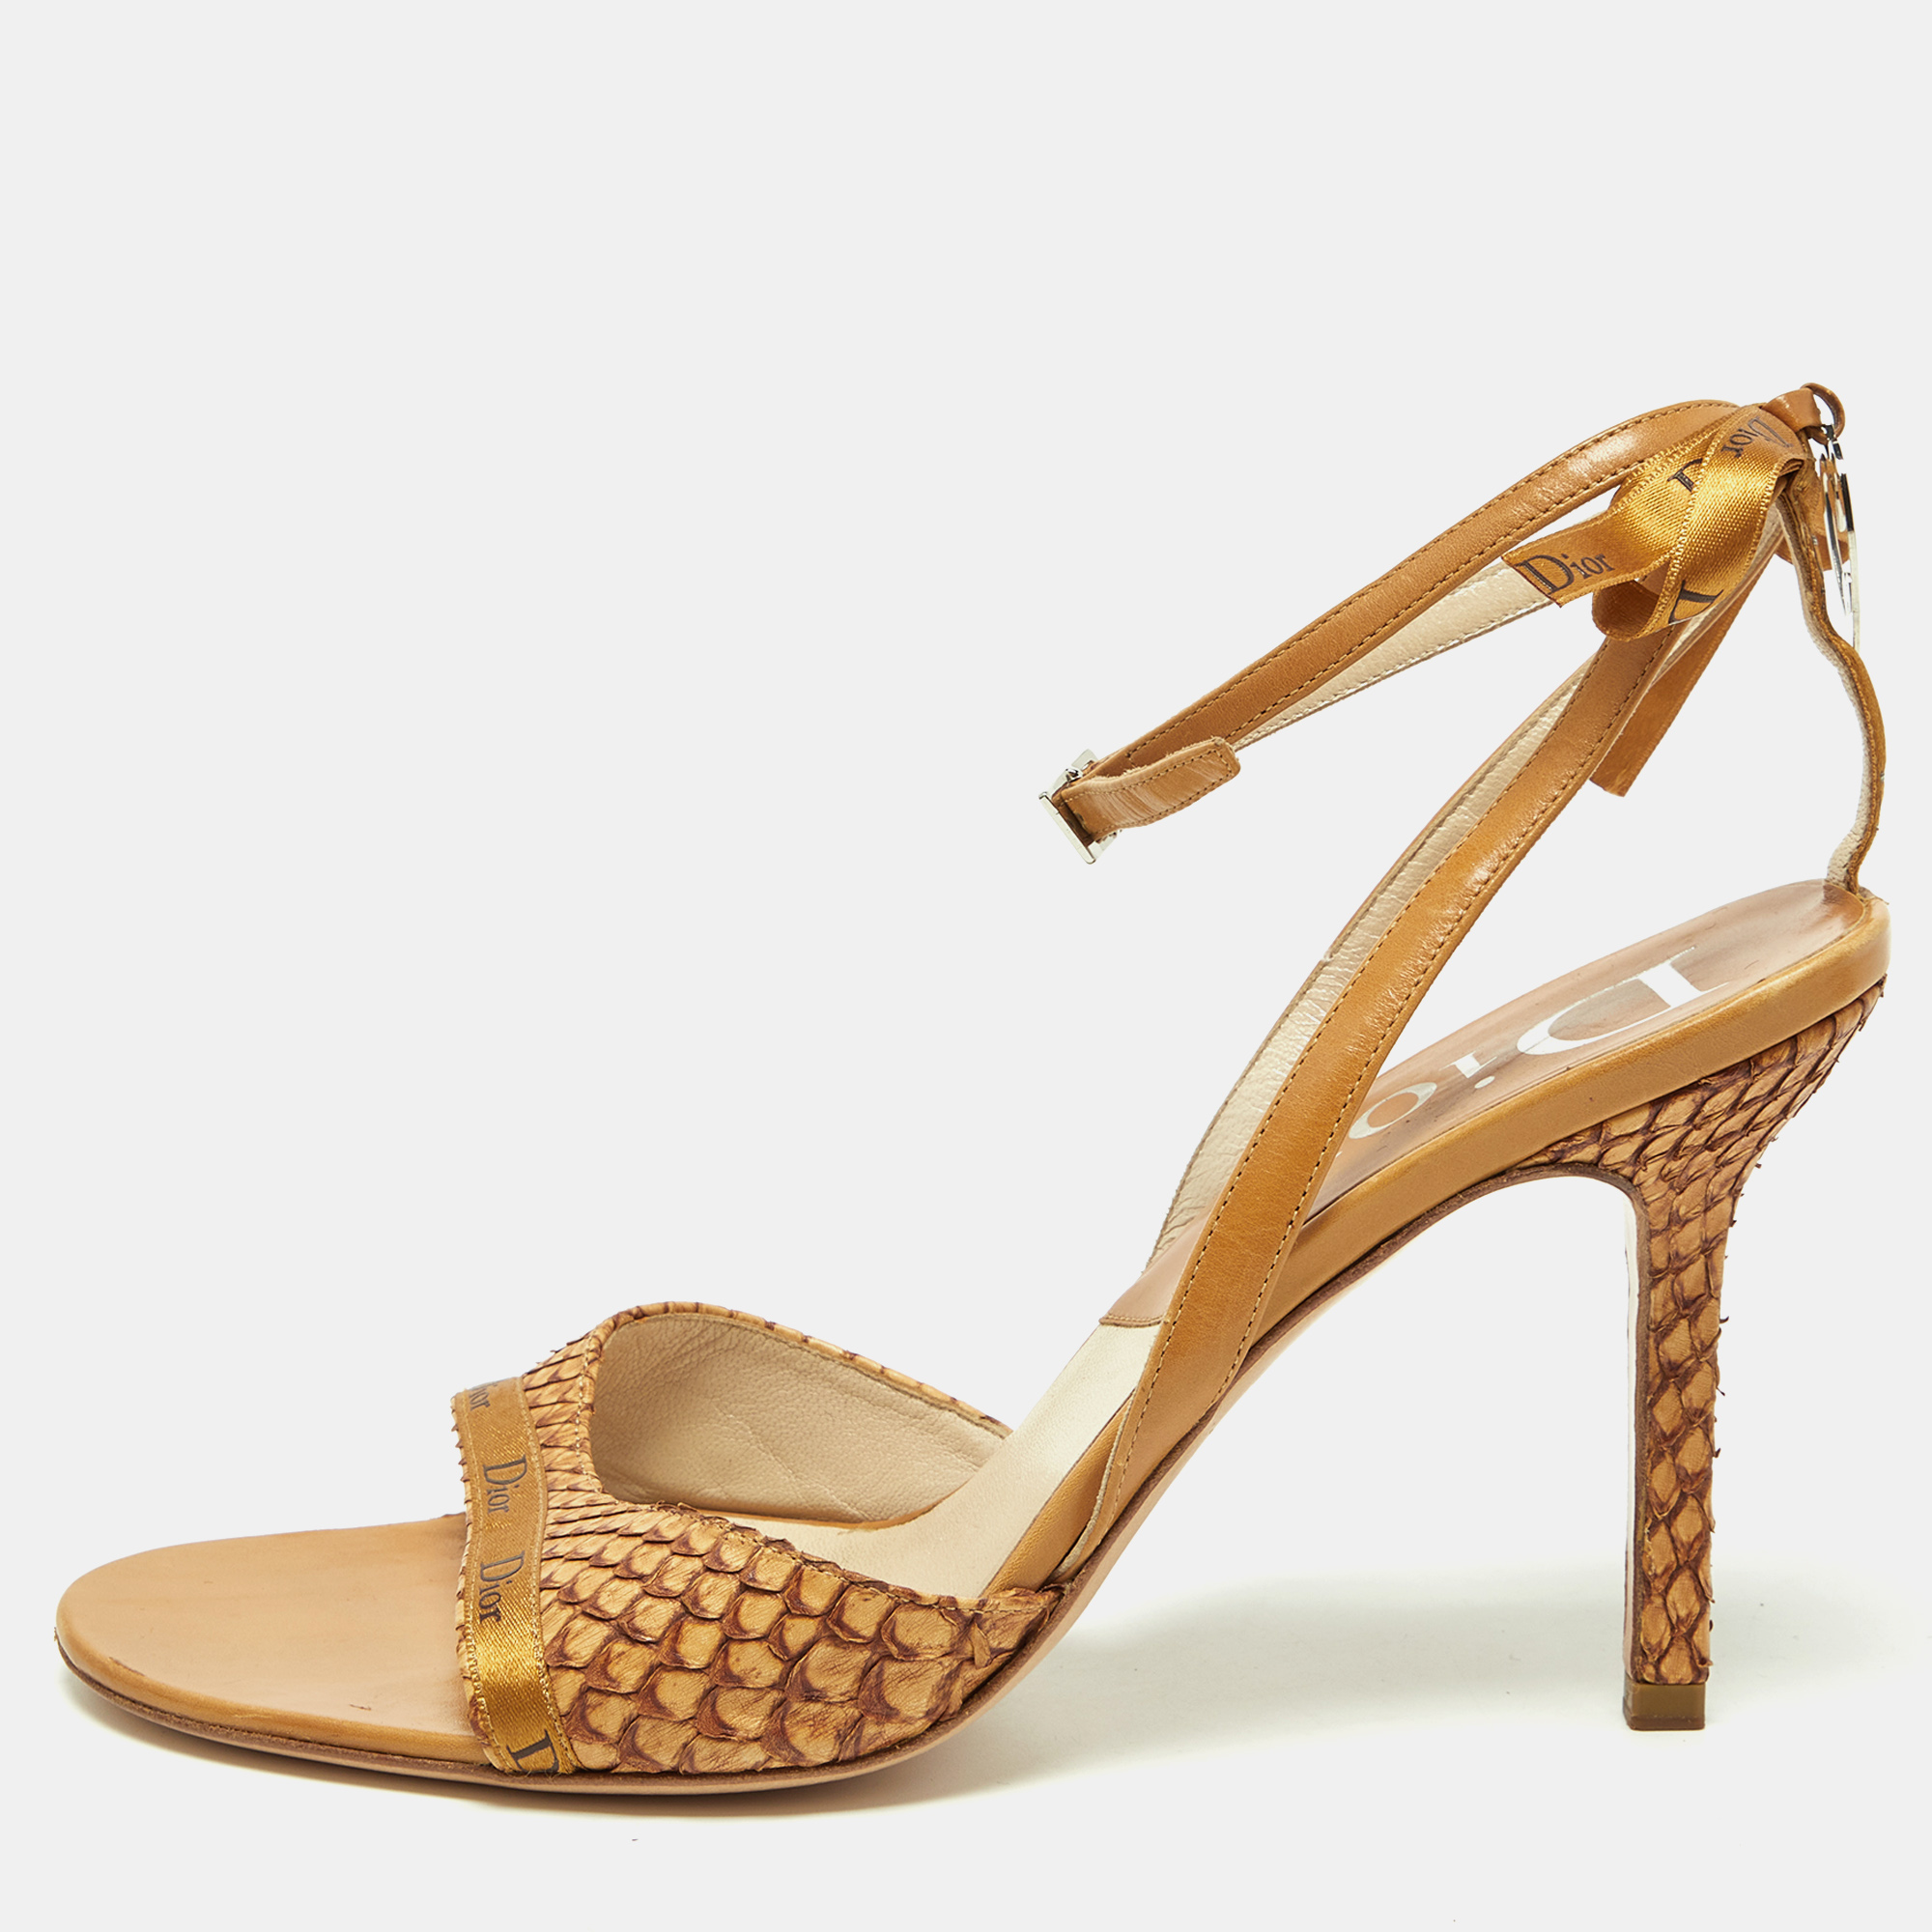 Dior Tan Python And Leather Ankle Strap Sandals Size 39